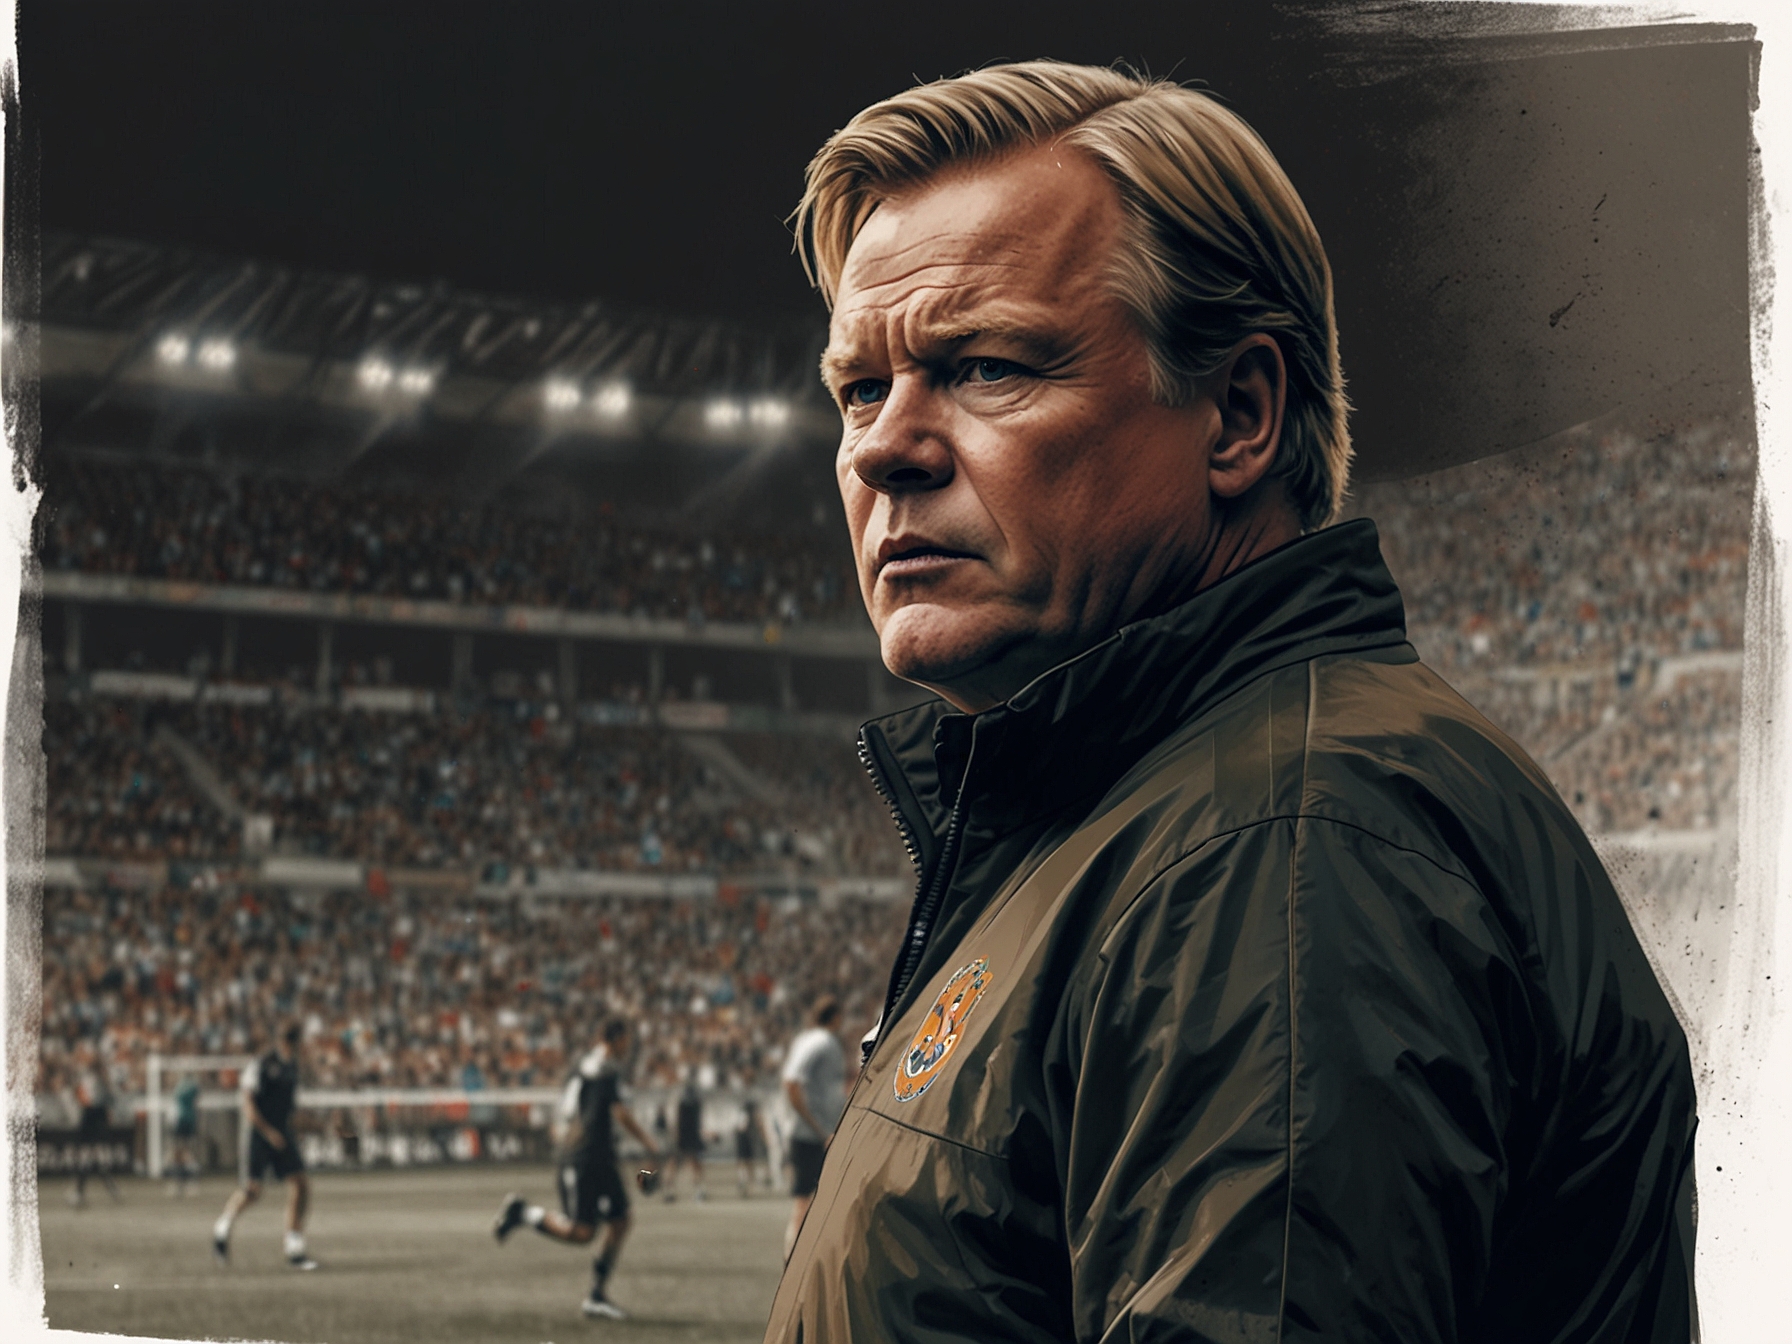 Ronald Koeman, head coach of the Netherlands, oversees a training session, focusing on tactical adjustments and player readiness, ahead of the EURO 2024 knockout stages.